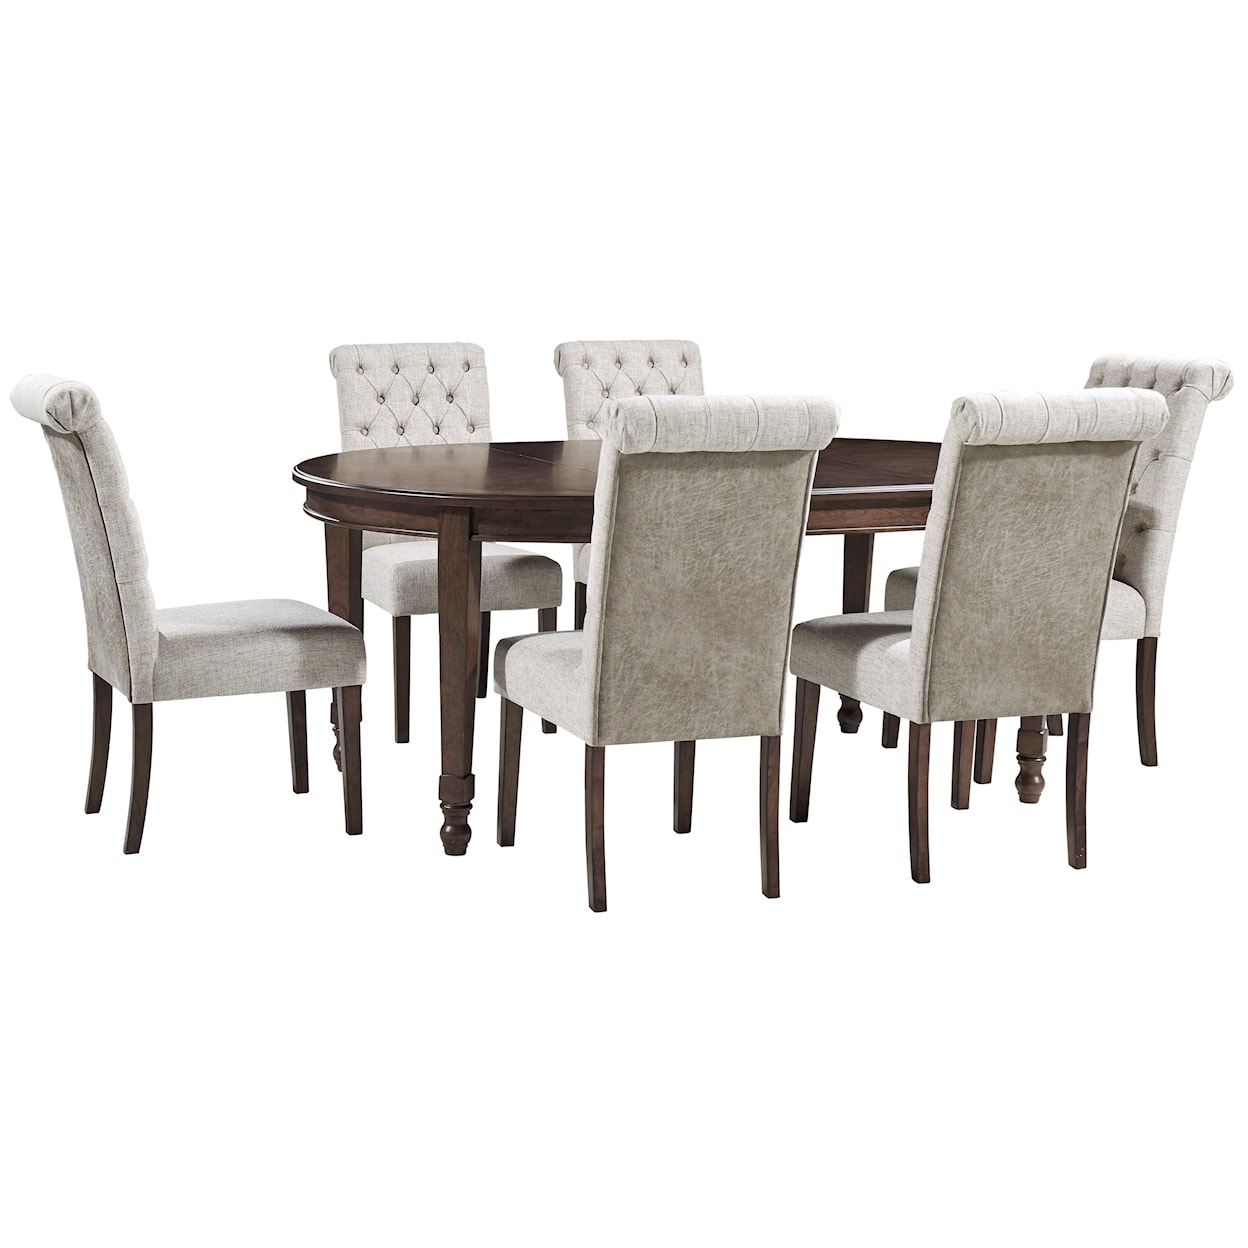 Benchcraft Adinton 7-Piece Table and Chair Set